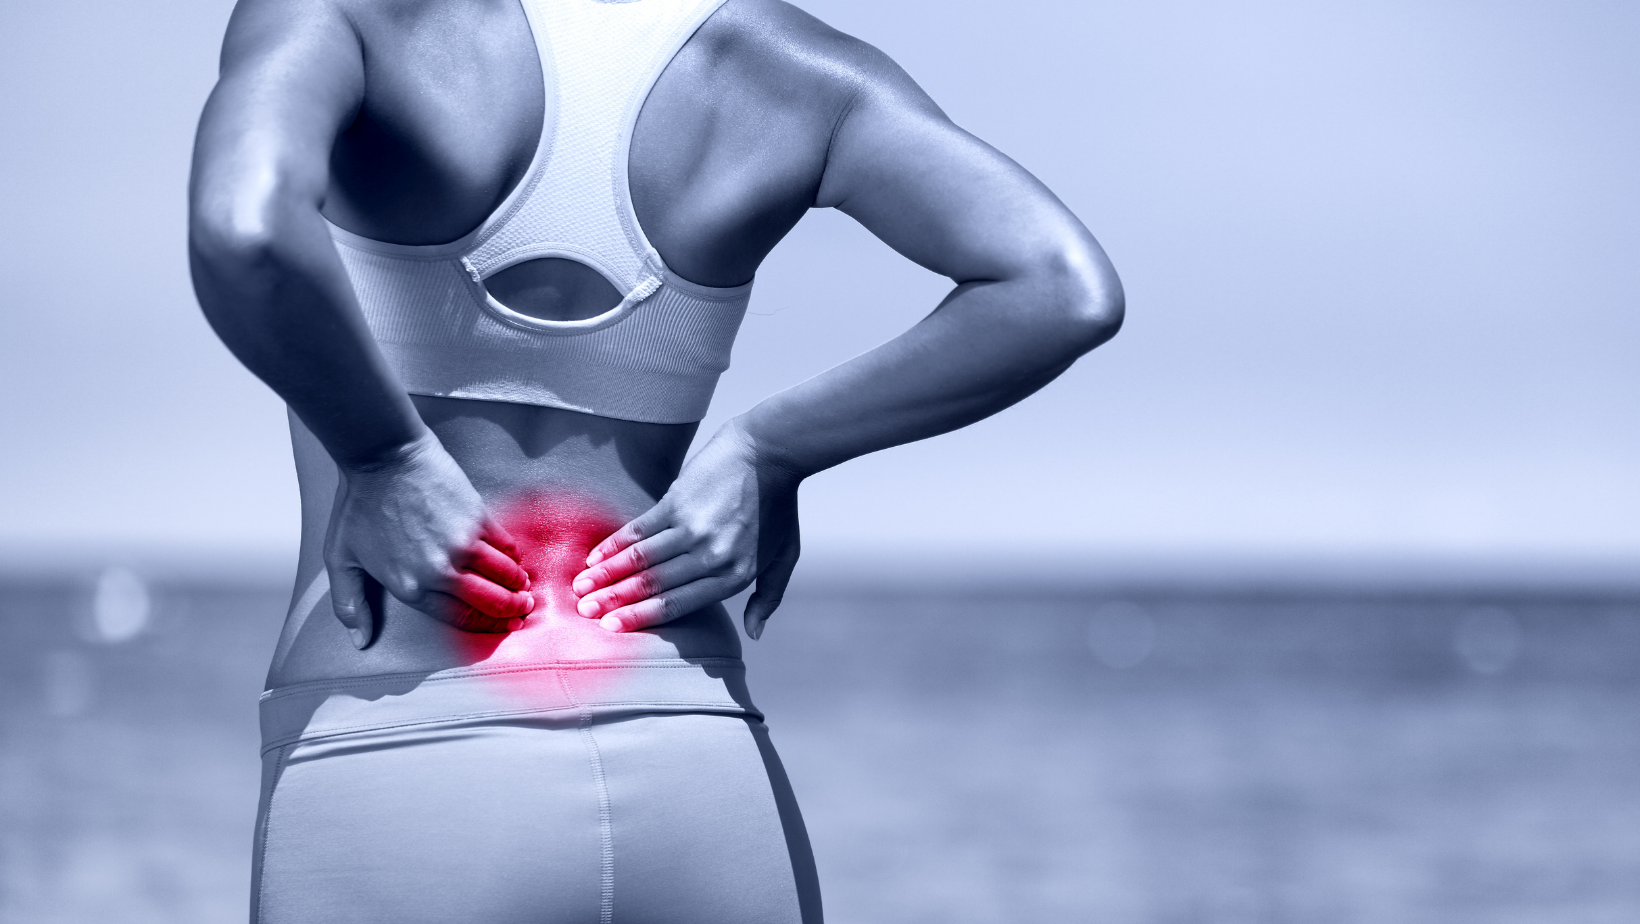 FIVE easy steps to prioritise your back health